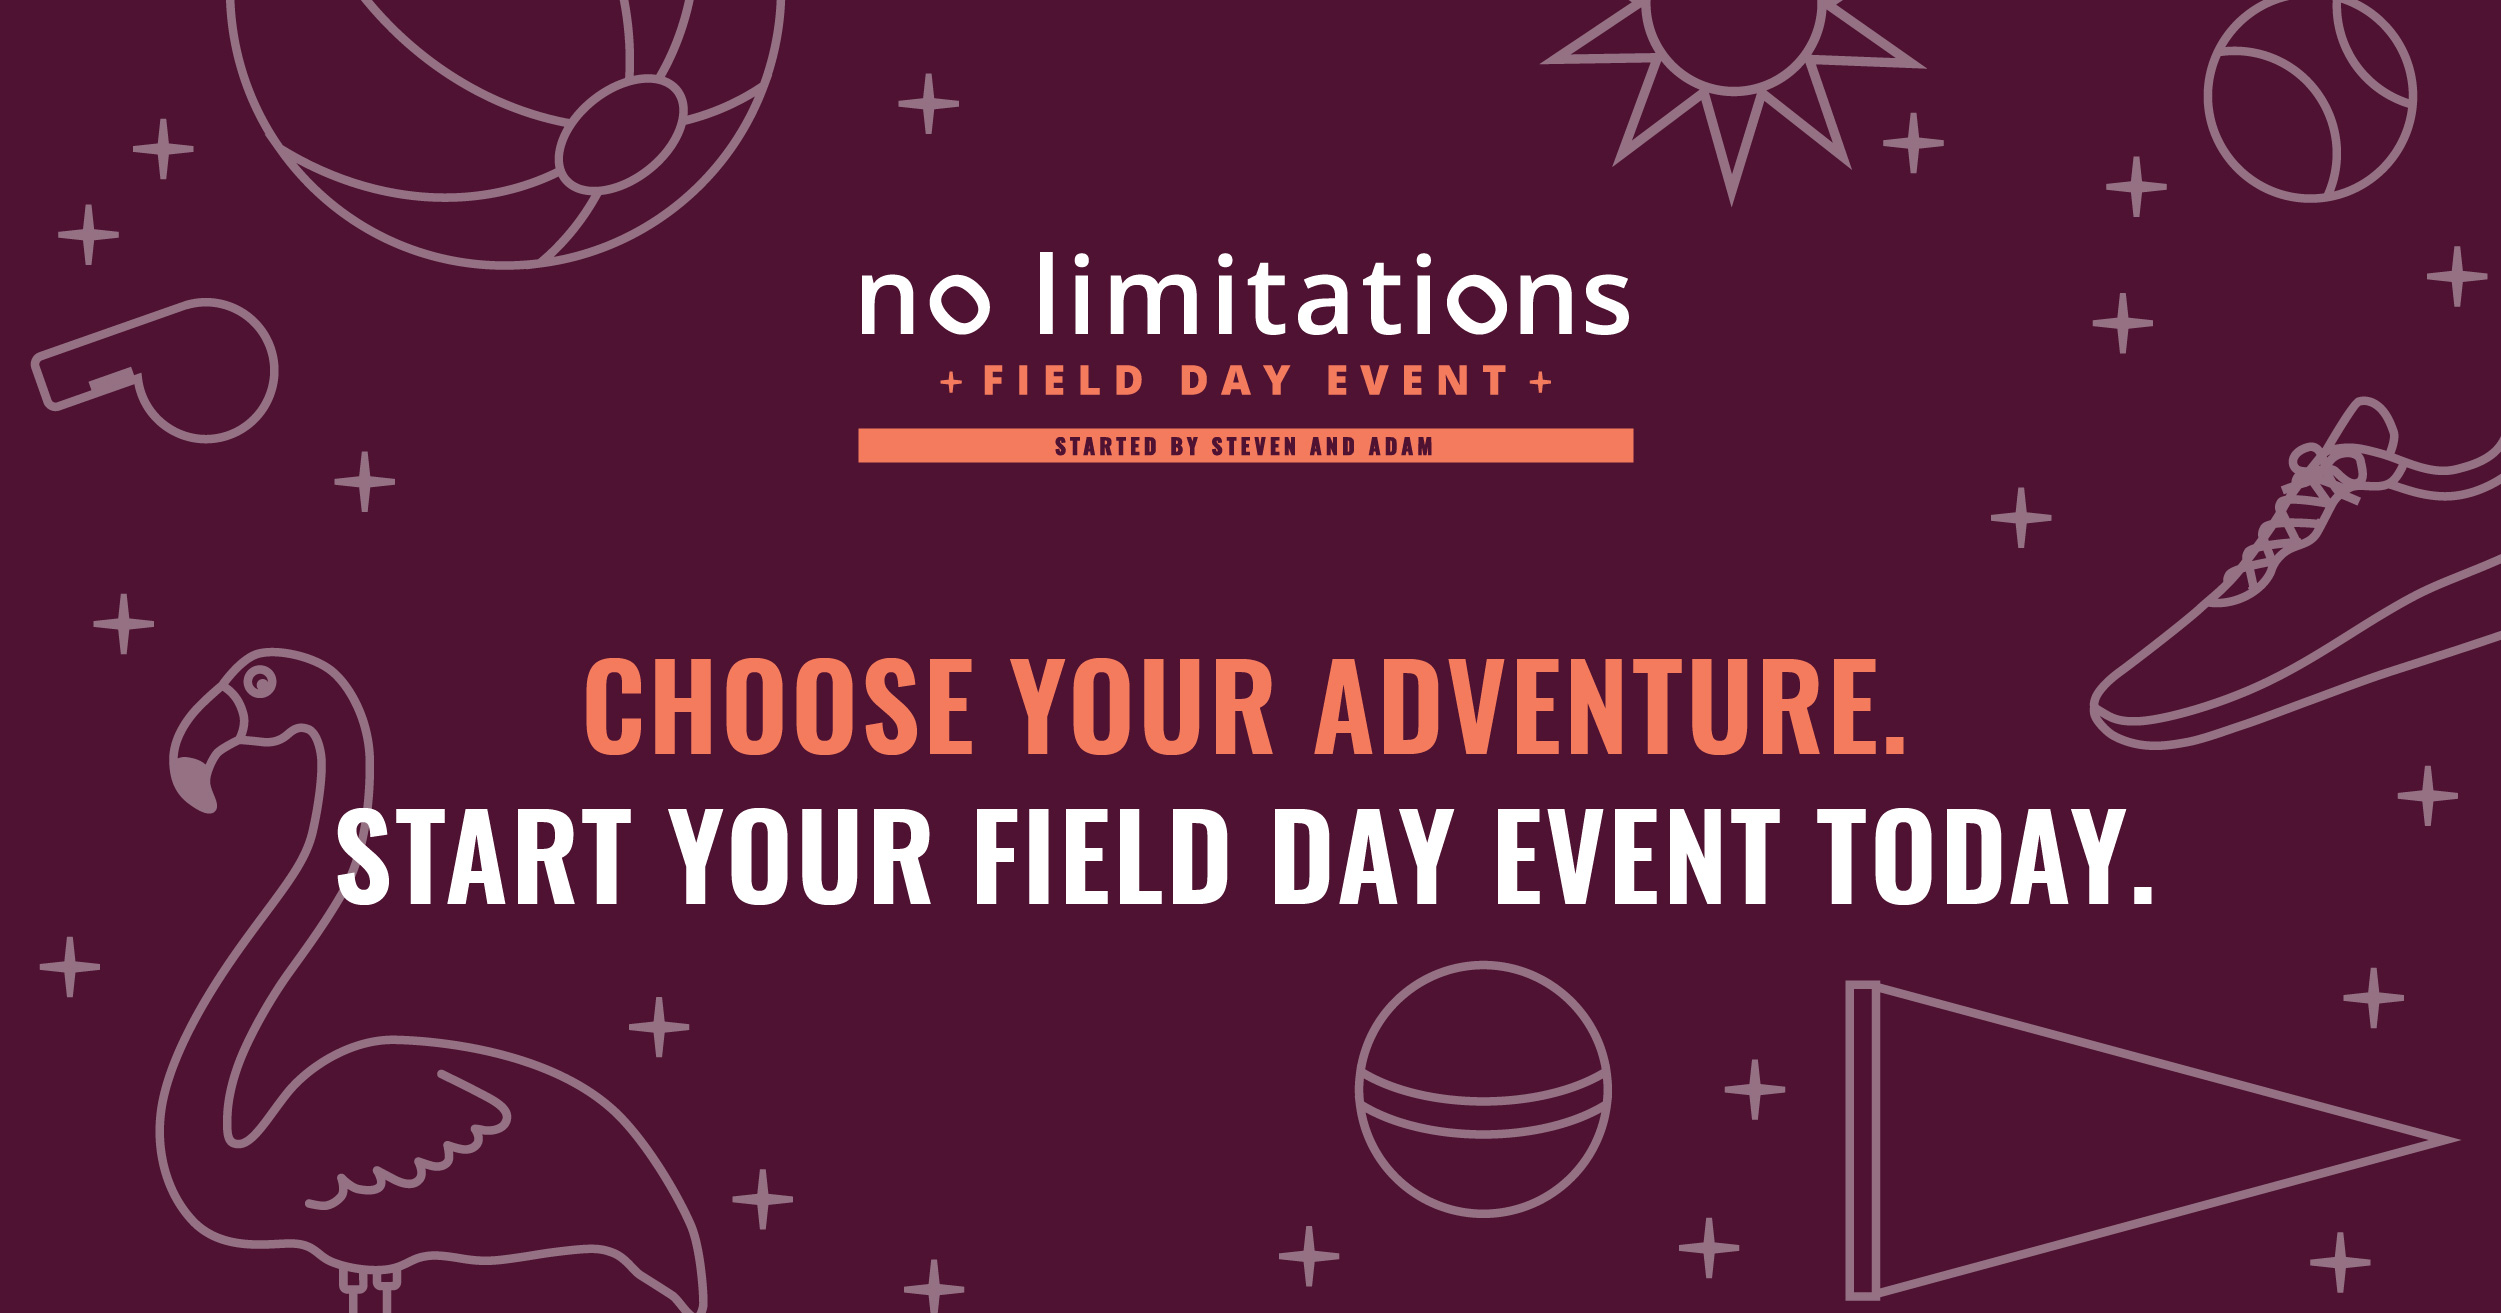 No Limitations Field Day Event - Field Day Banner 2022